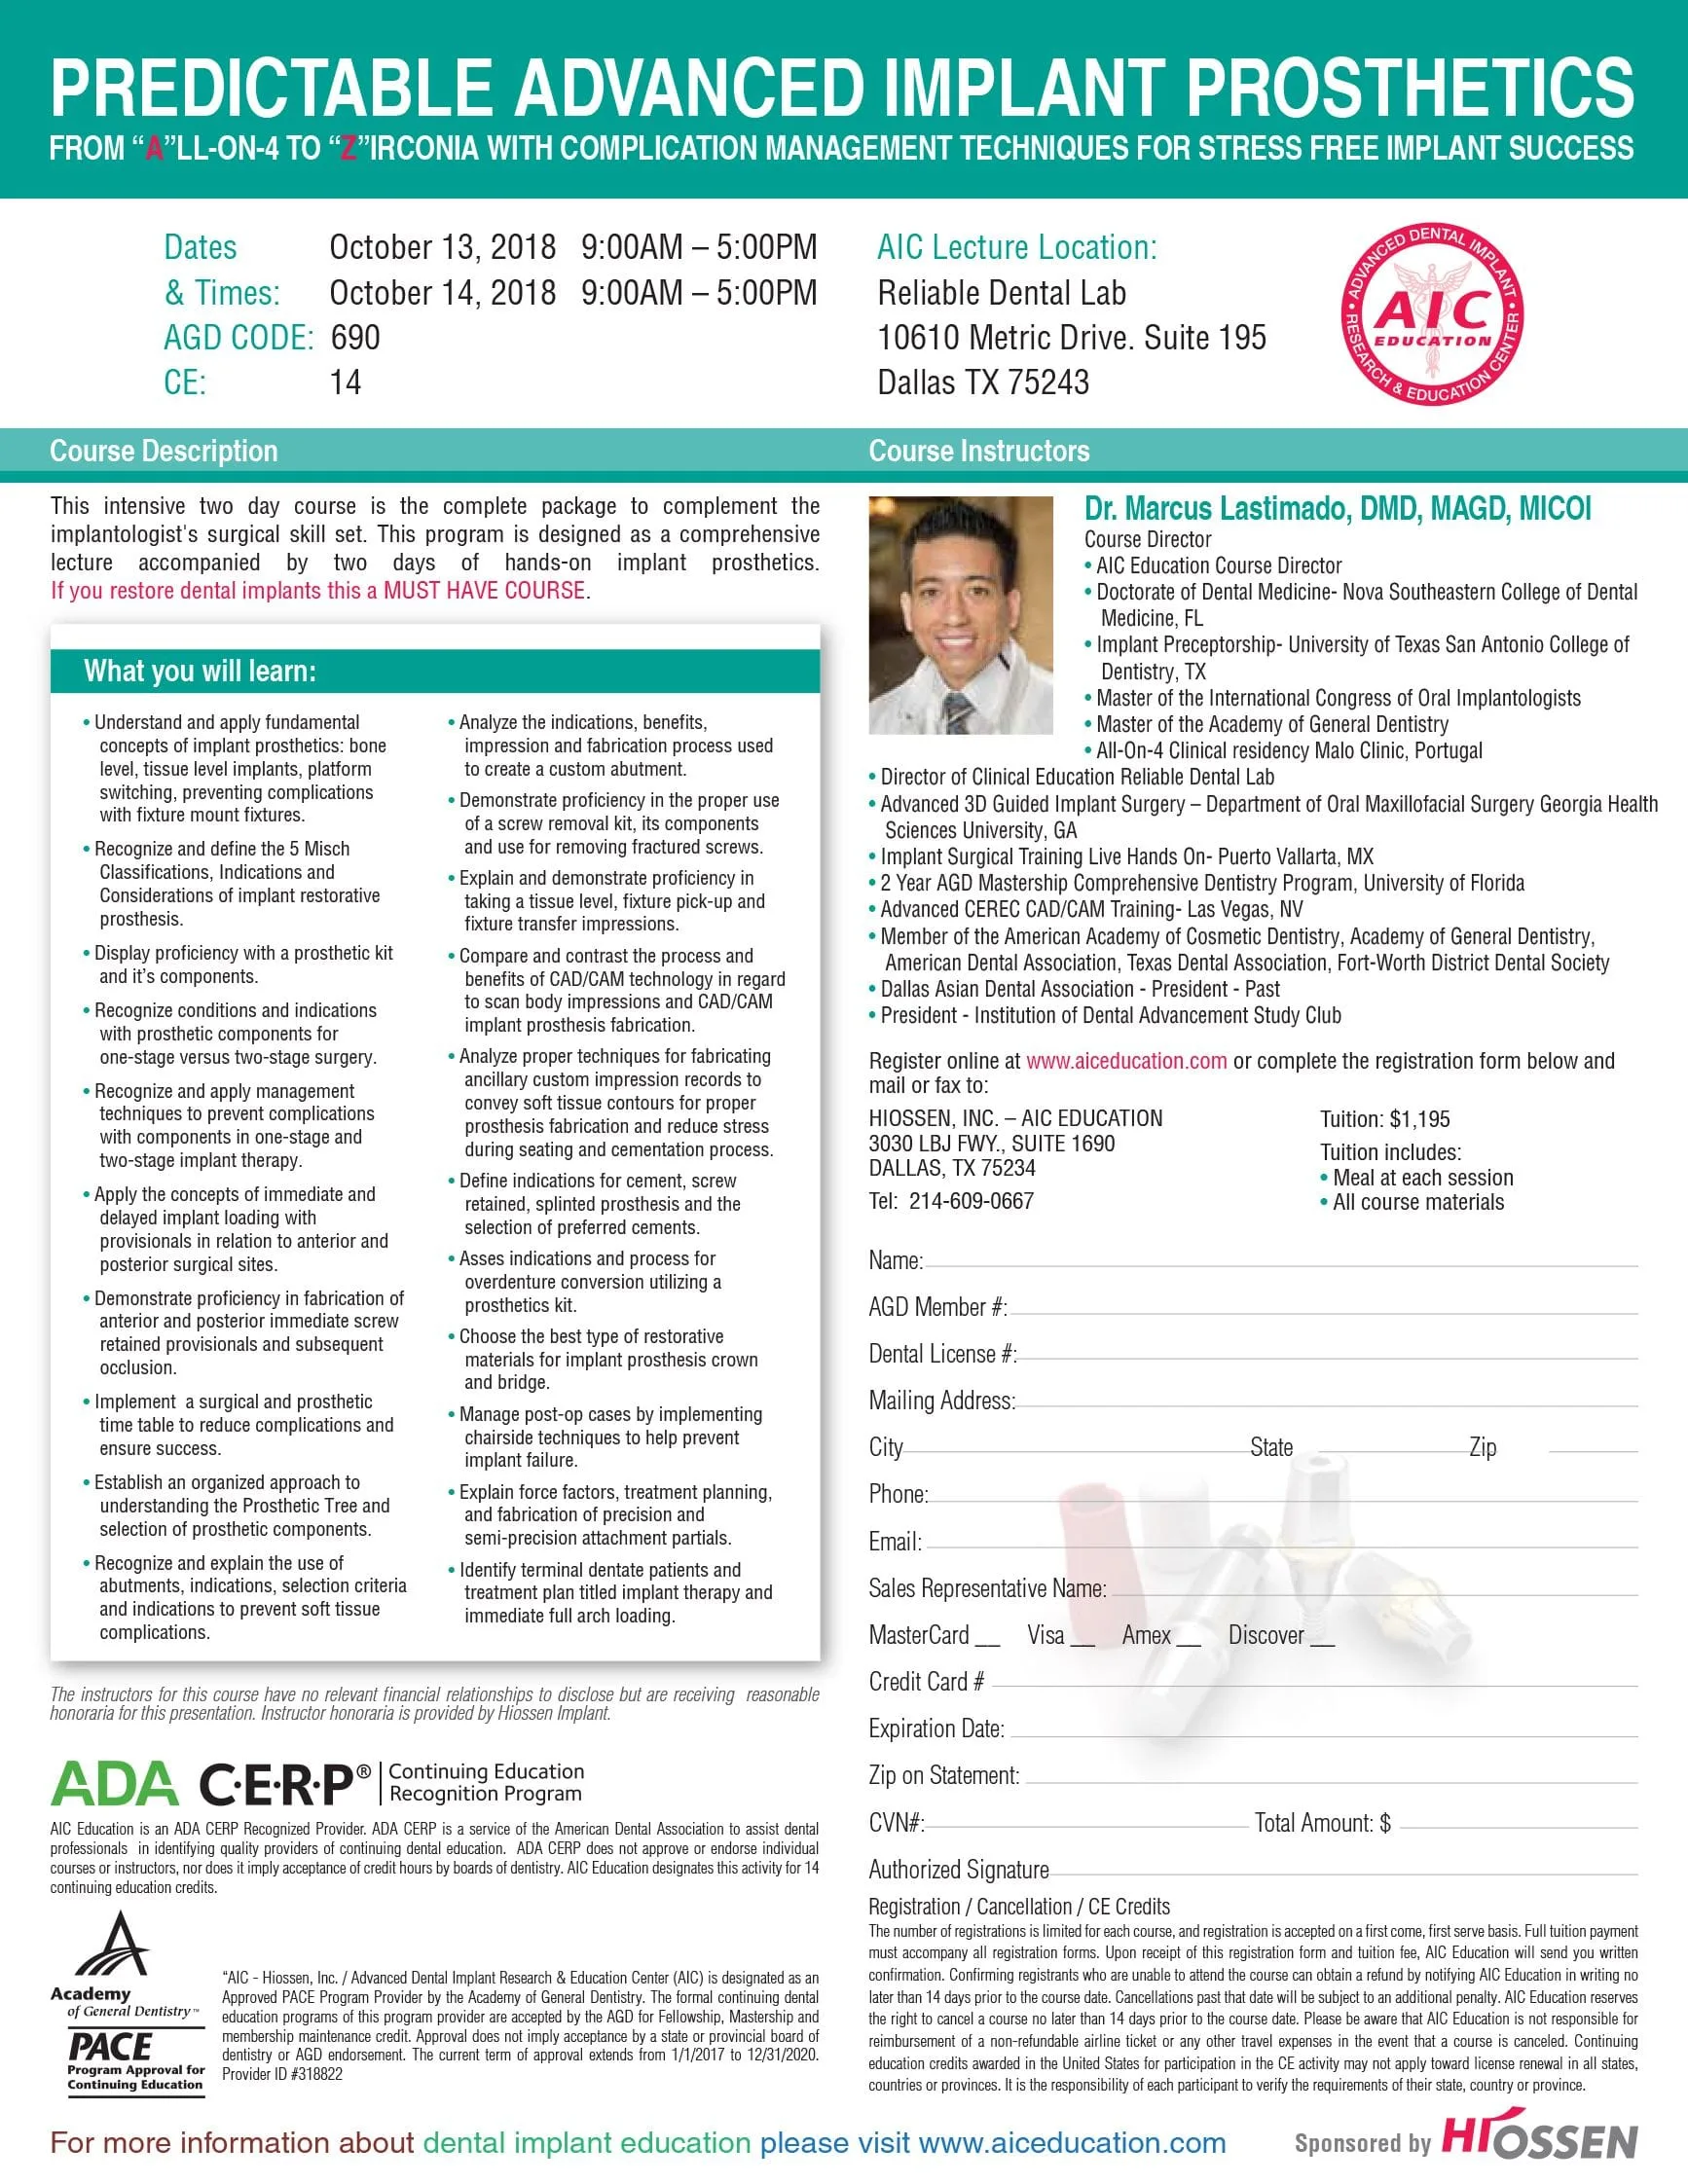 implant prosthetics course for dentists